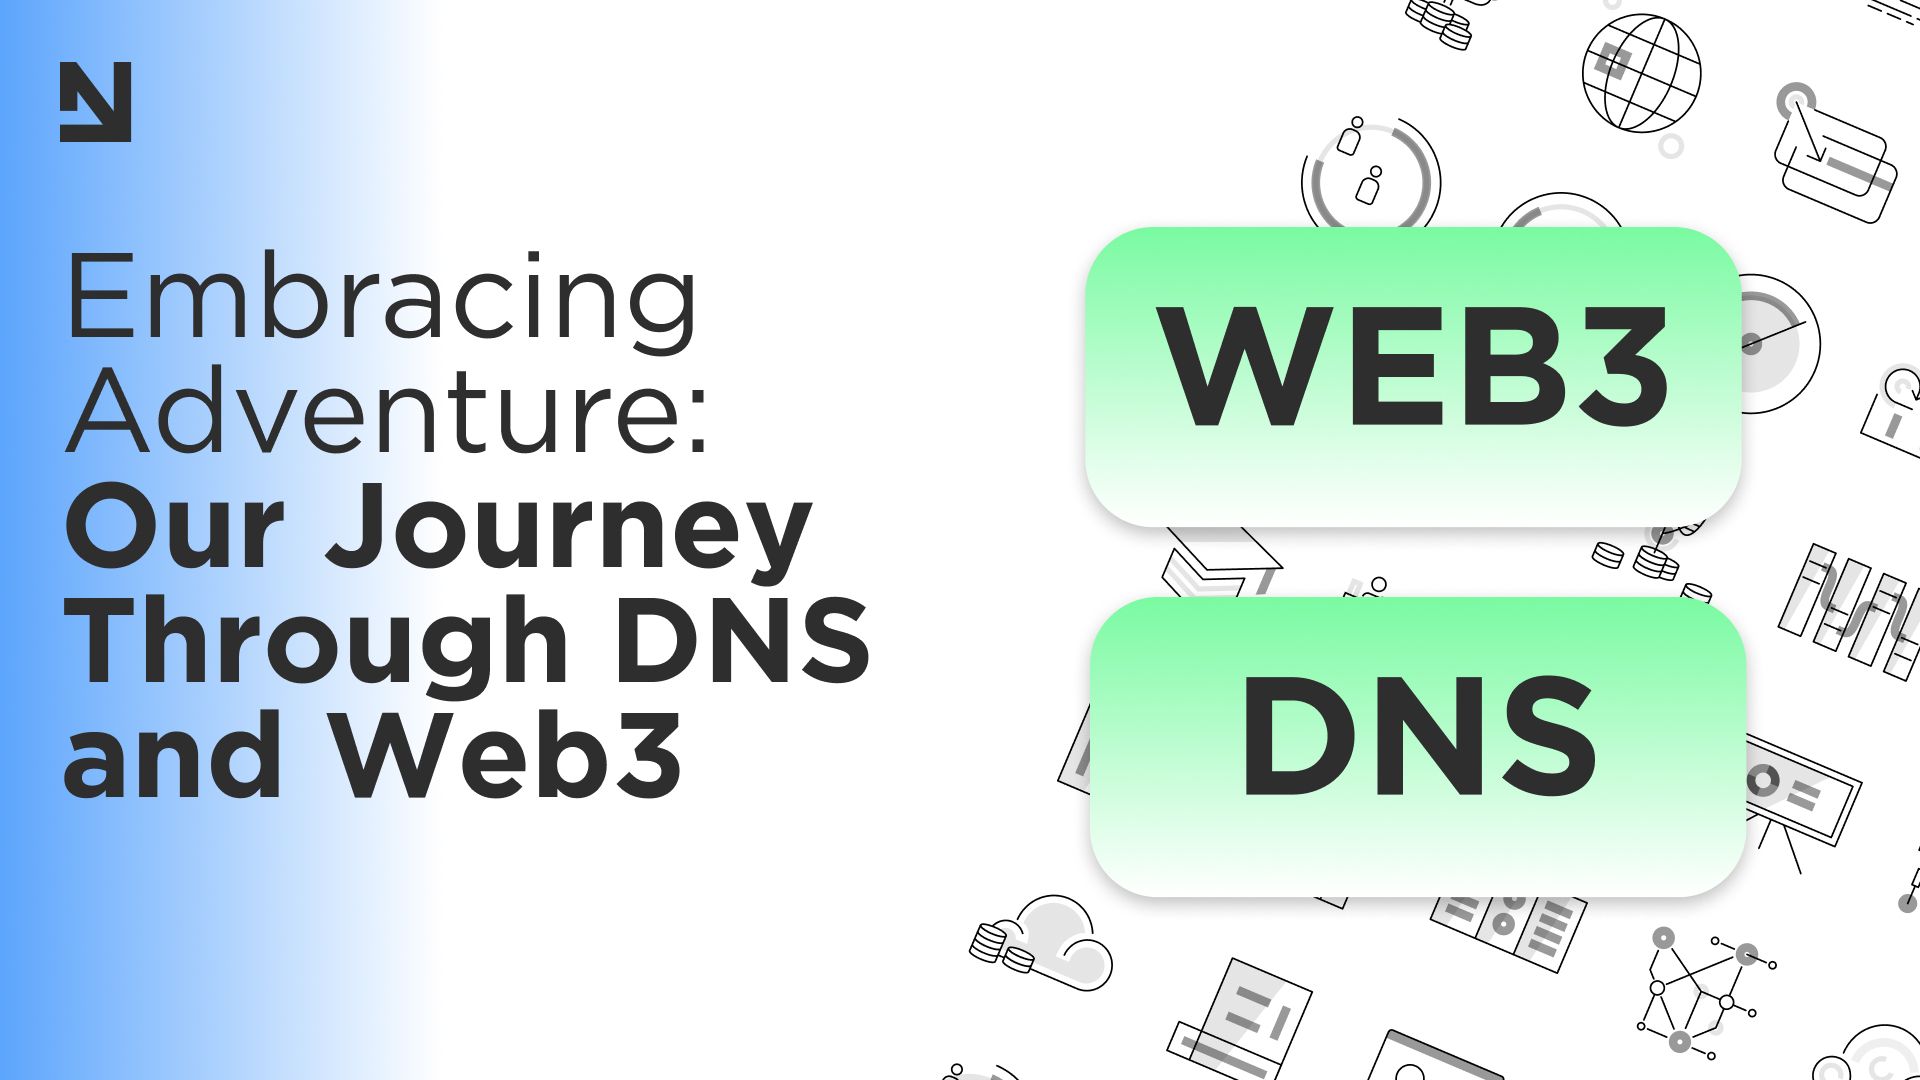 Embracing Adventure: Our Journey Through DNS and Web3